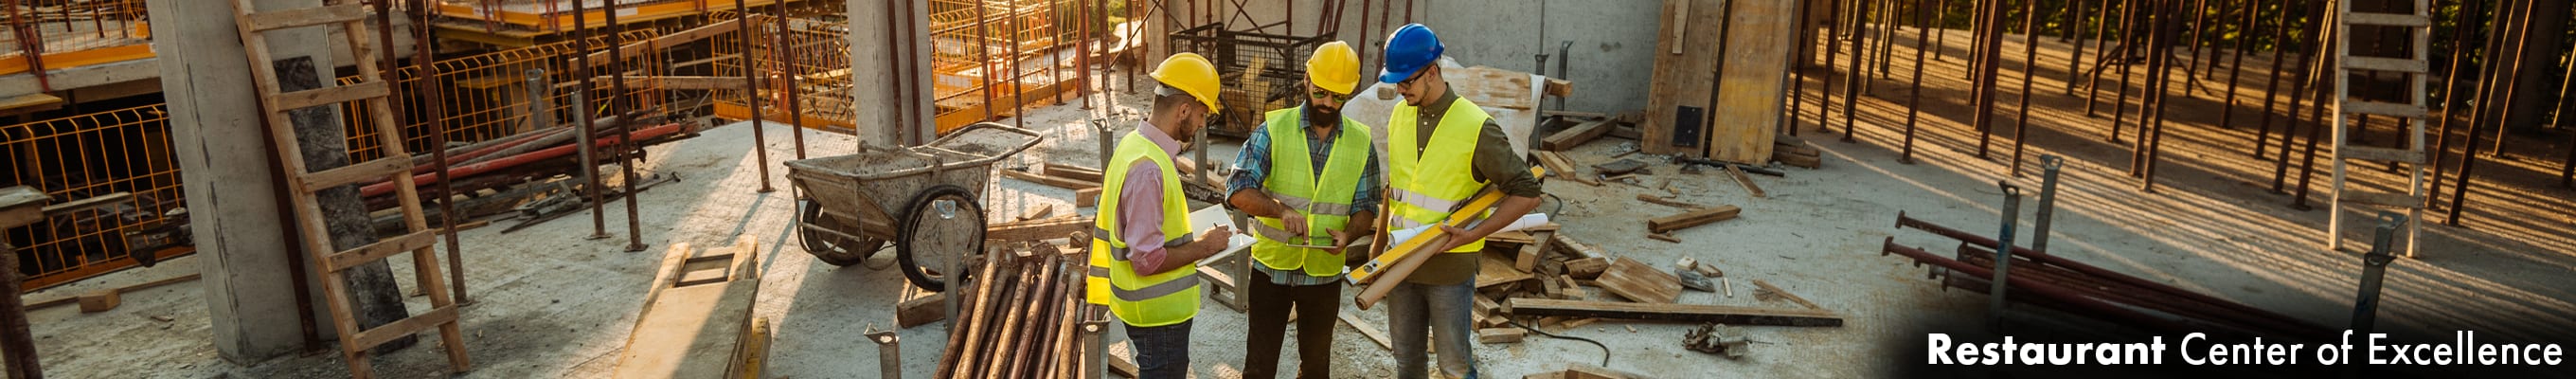 three construction workers standing and discussing plans while referencing a tablet, amidst a large construction project site